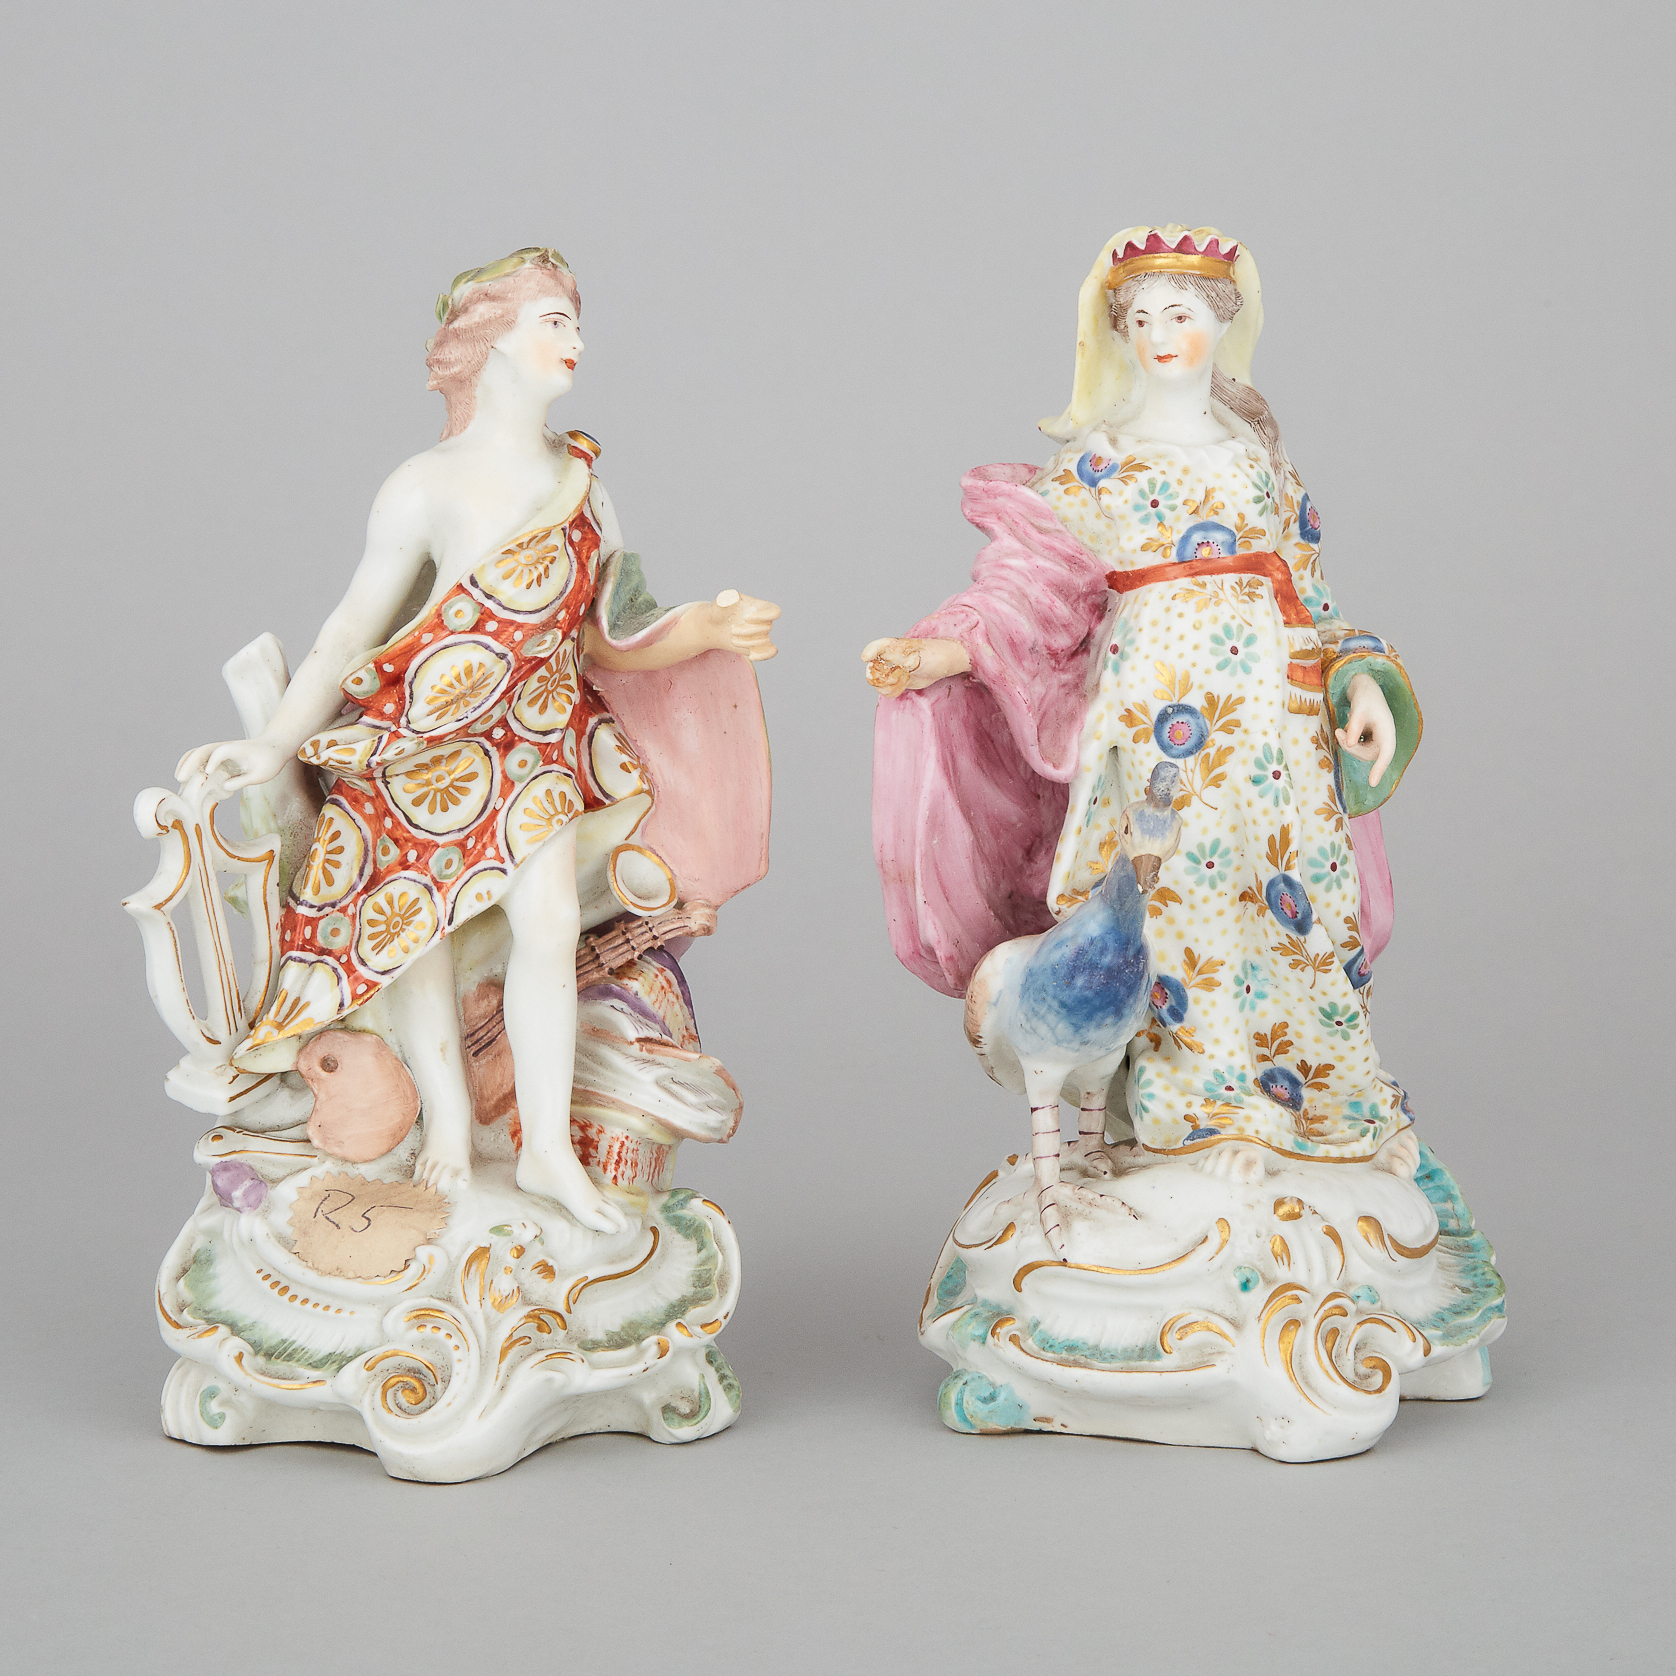 Pair of Derby Figures of Juno and Apollo, c.1765-70